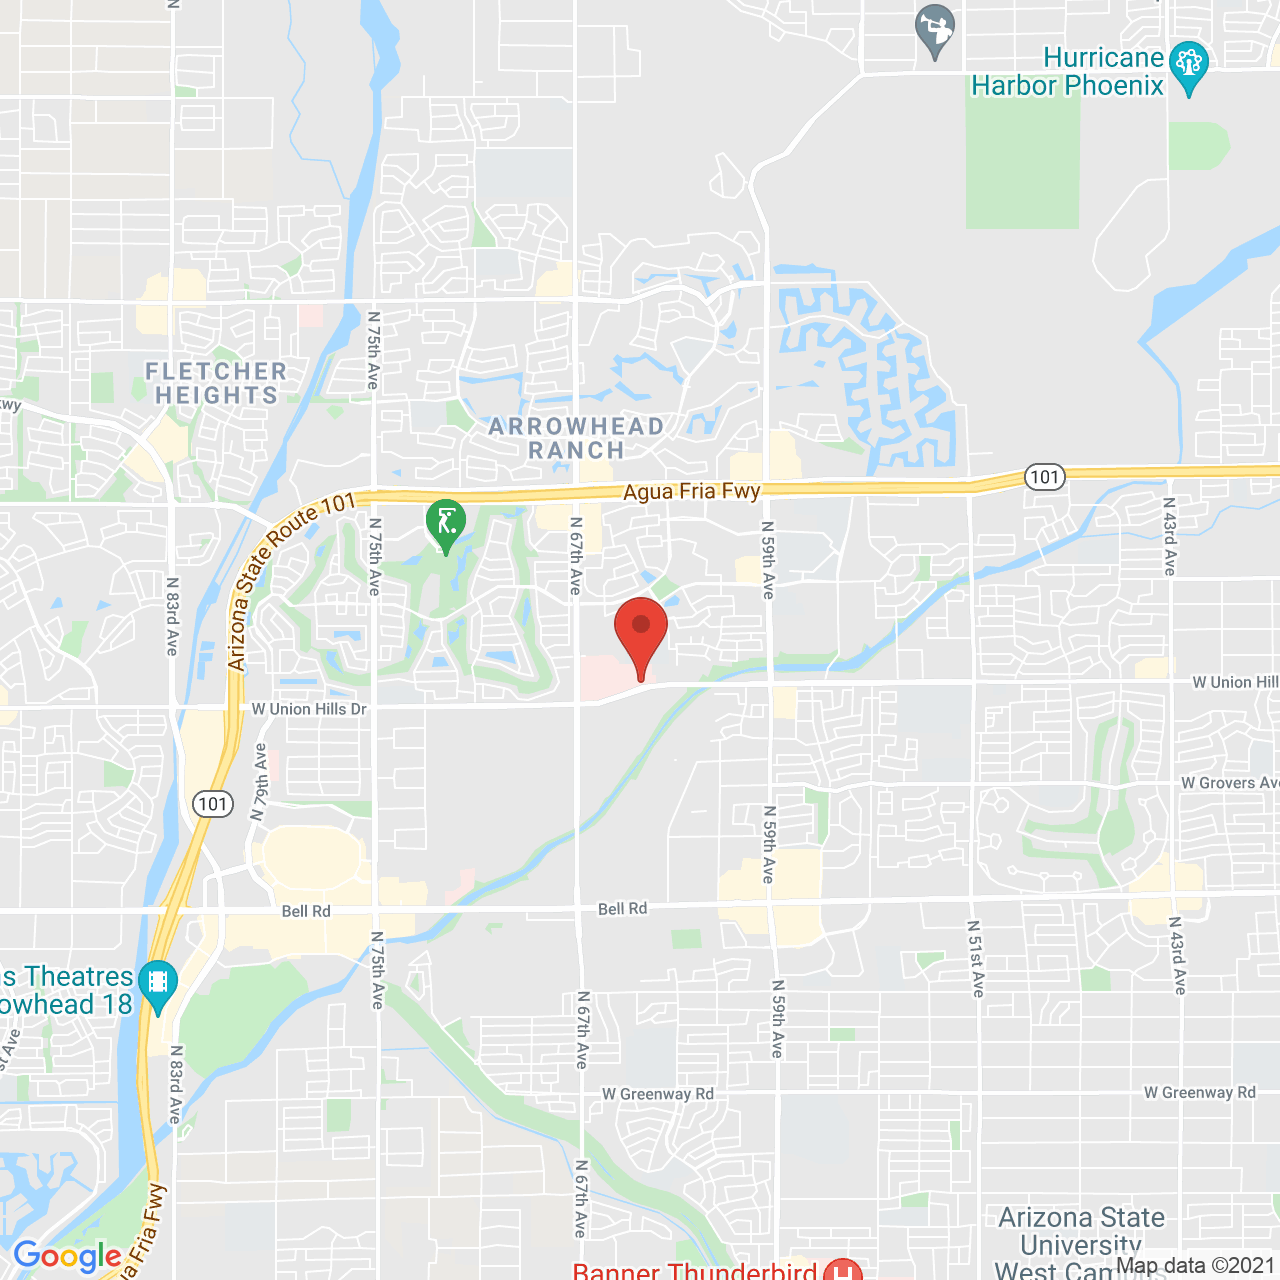 Google map image of our location in 6313 W Union Hills Dr. Glendale, AZ 85308